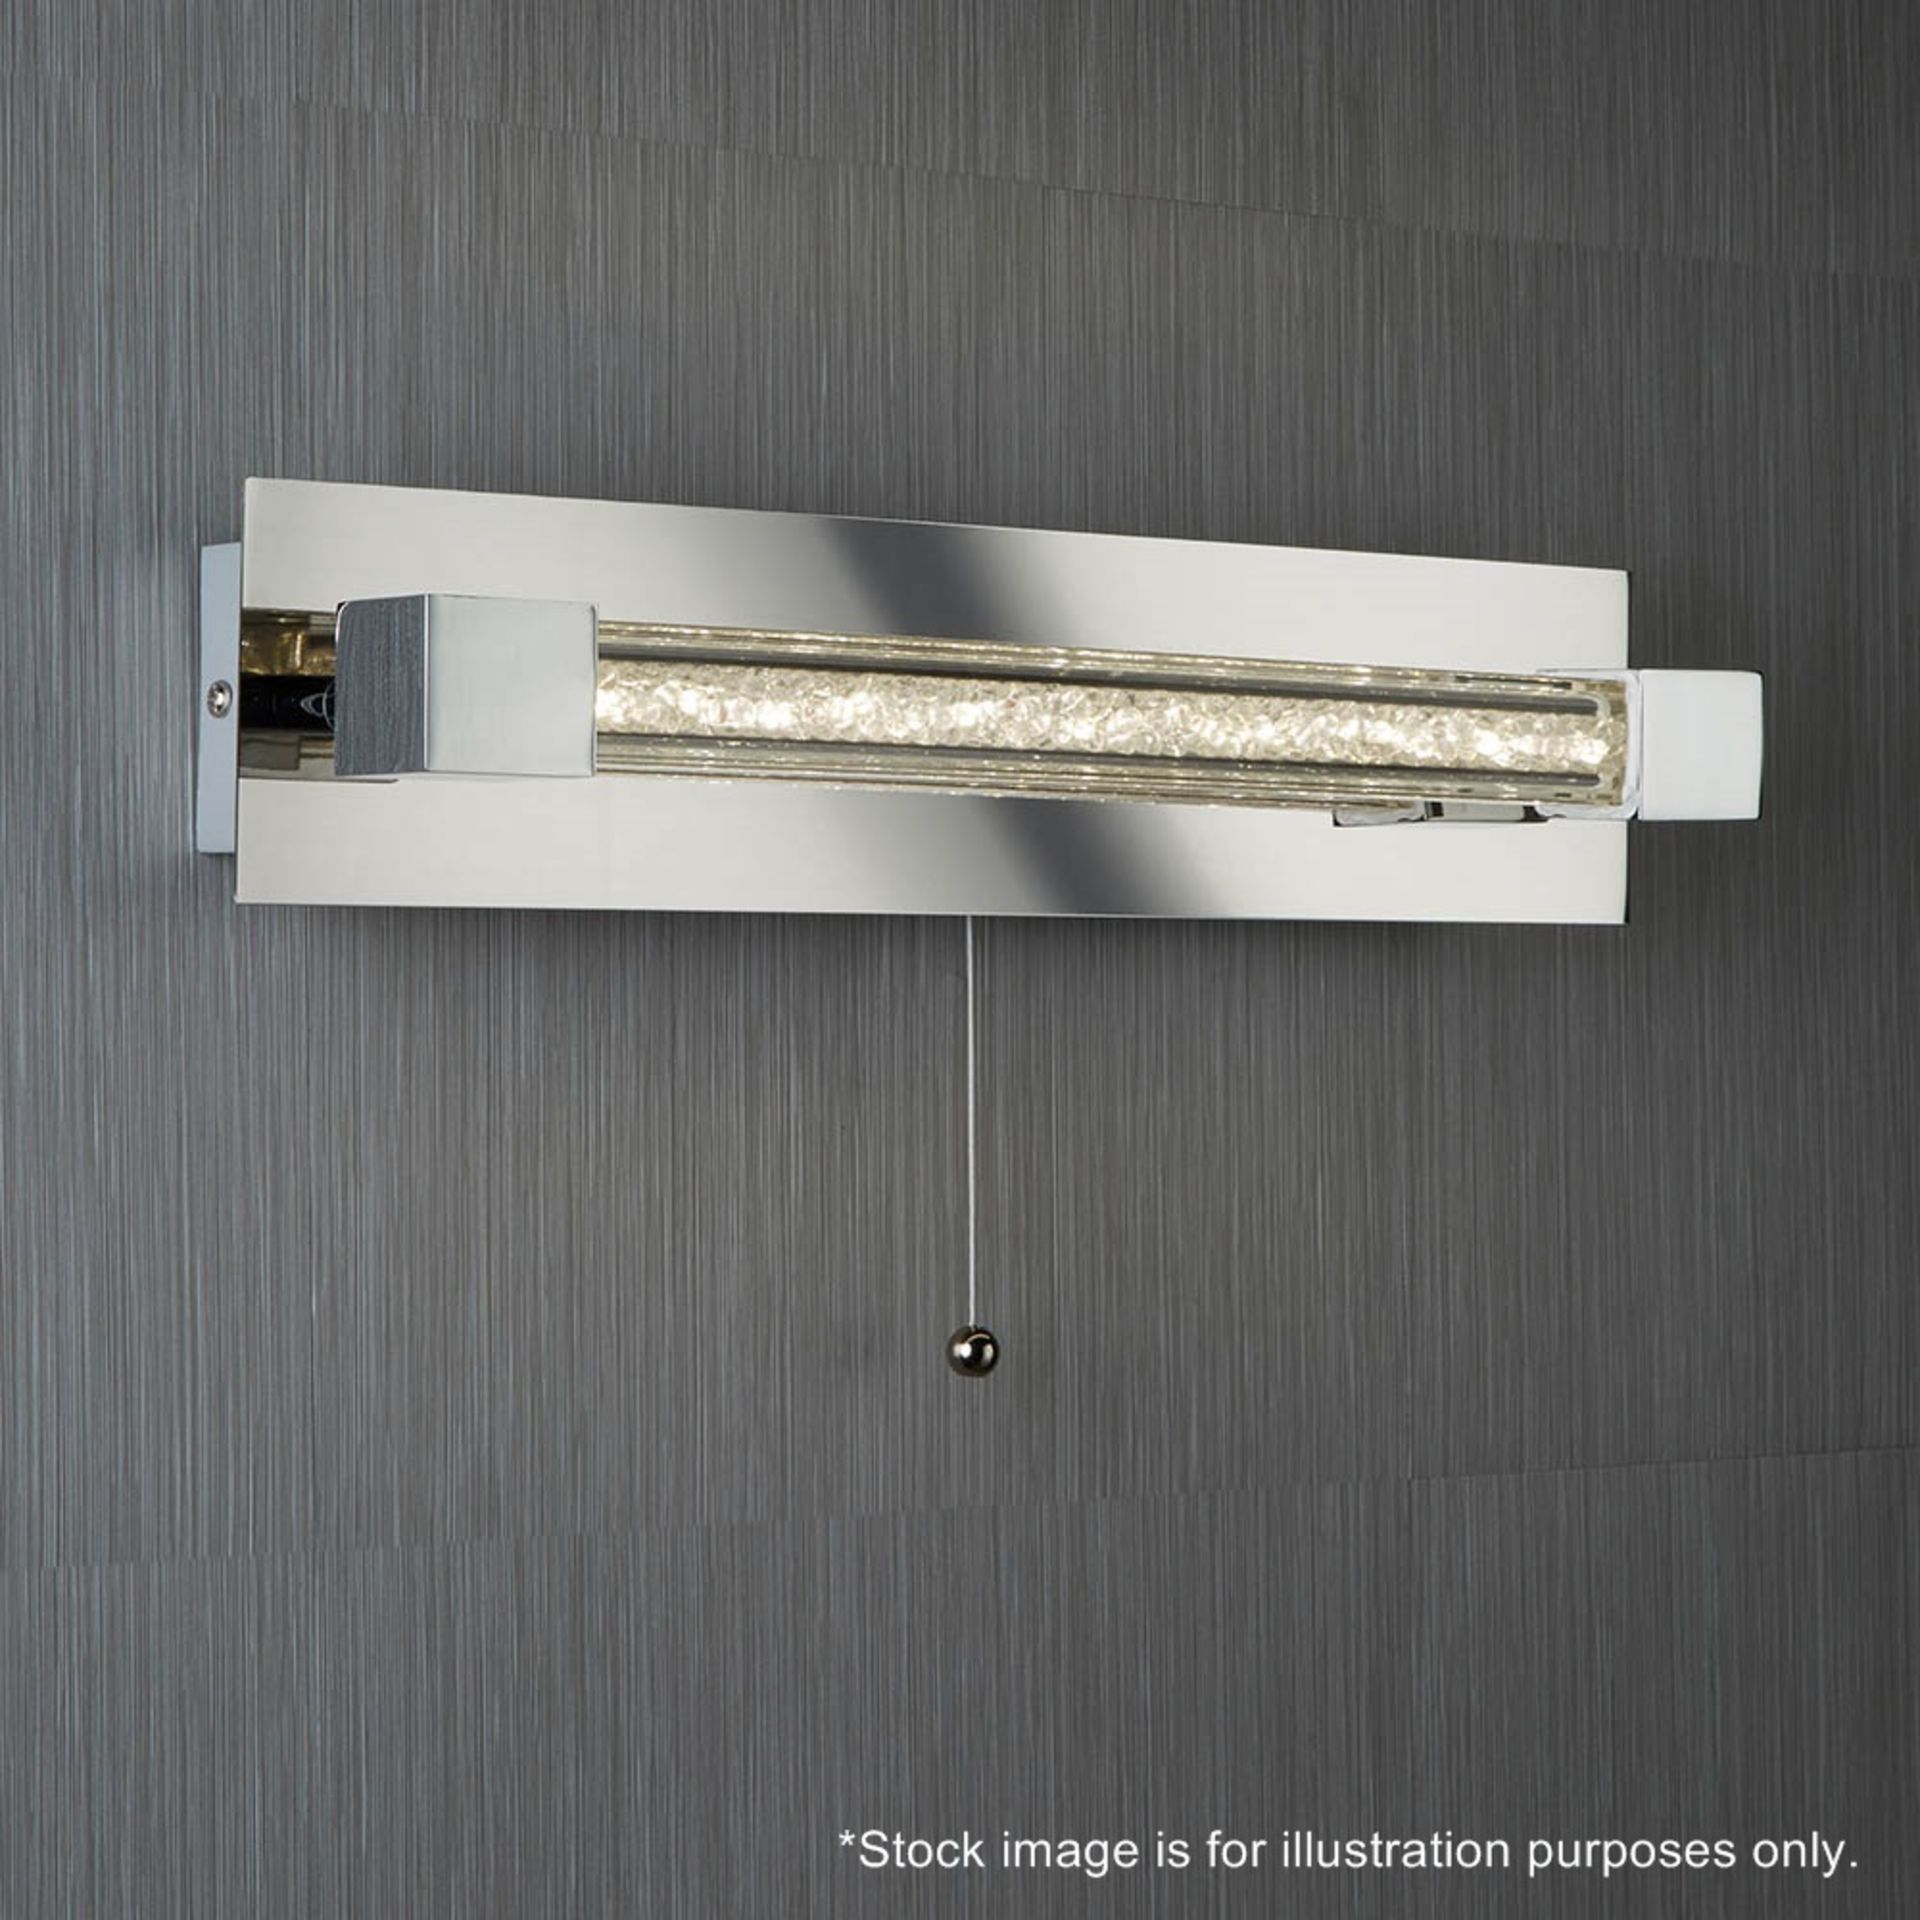 1 x Searchlight Chrome LED Bathroom / Kitchen Wall Light with Clear Crystal Glass Bar - IP44- Boxed